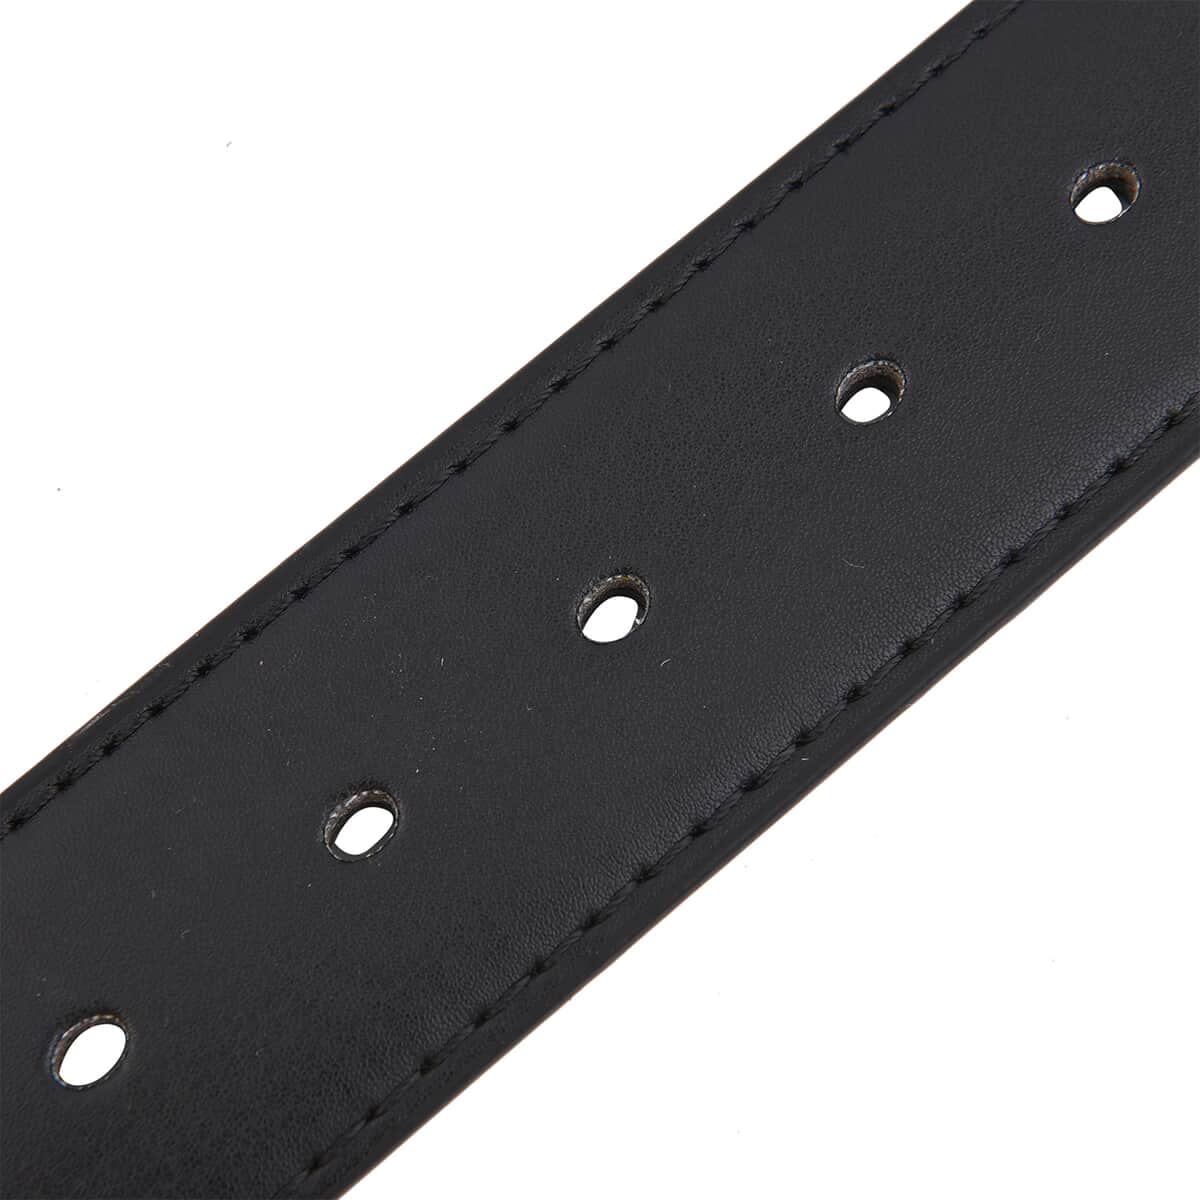 2-in-1 Black Wallet Faux Leather Belt with Hidden Zipper Pocket - L (47-49 Inches) image number 1